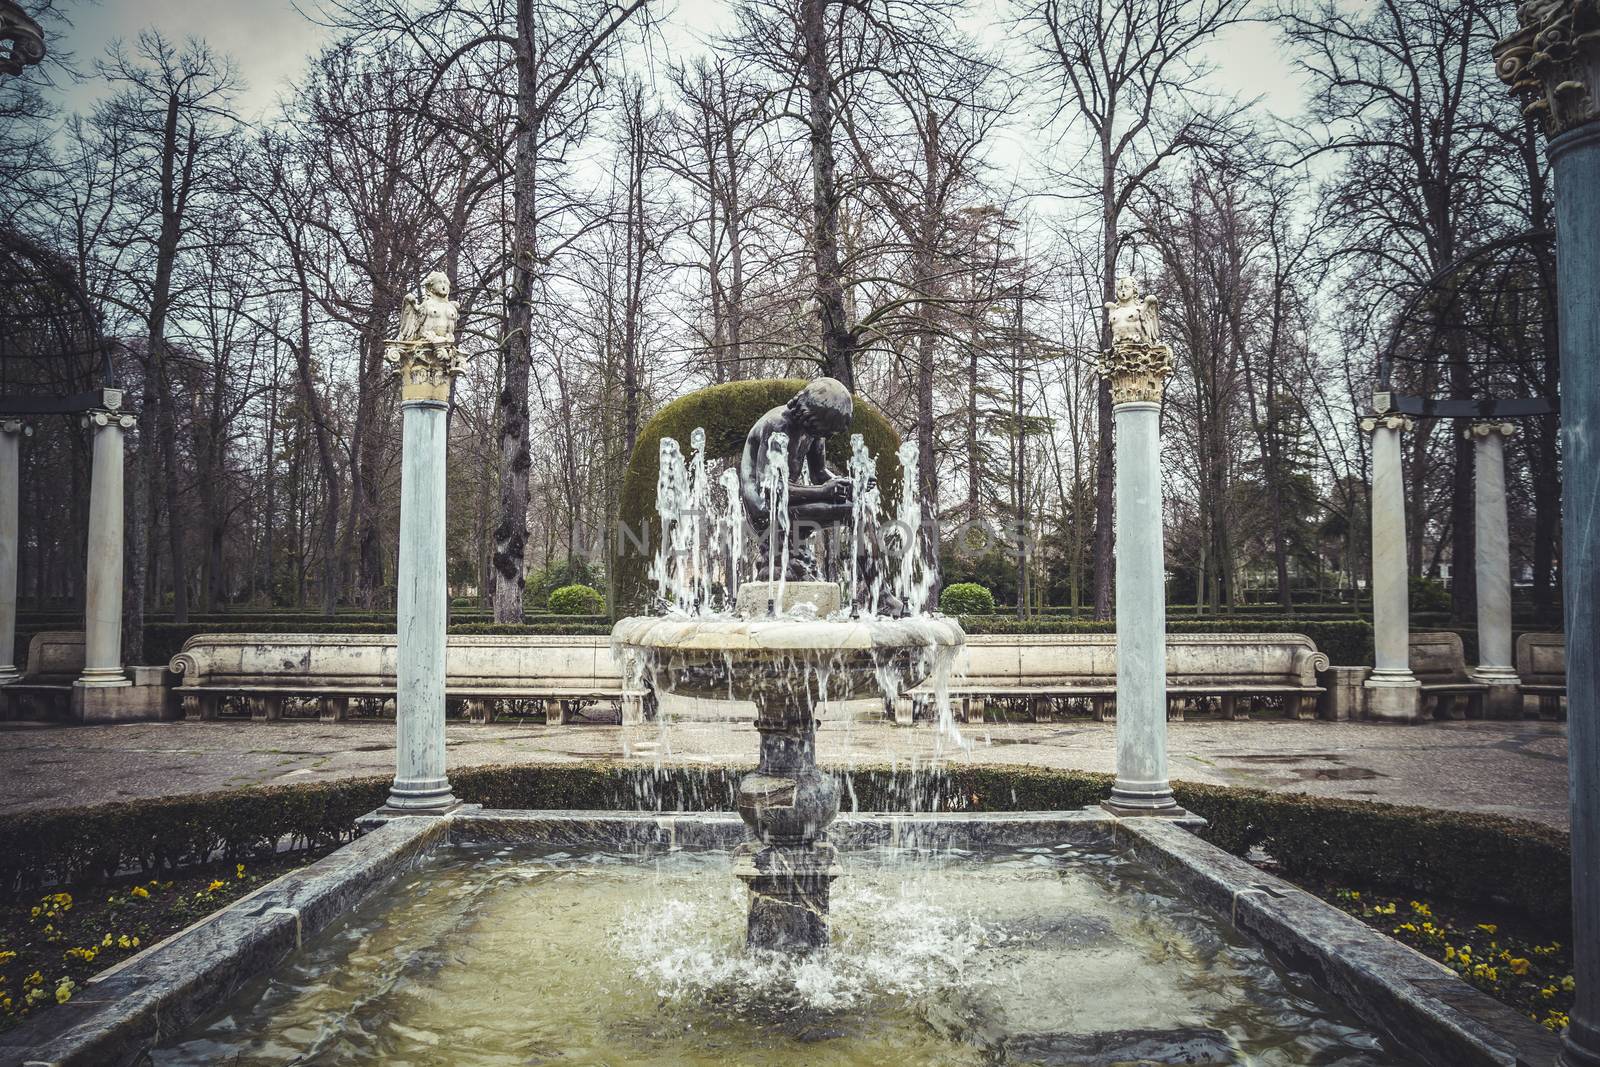 Ornamental fountains of the Palace of Aranjuez, Madrid, Spain by FernandoCortes